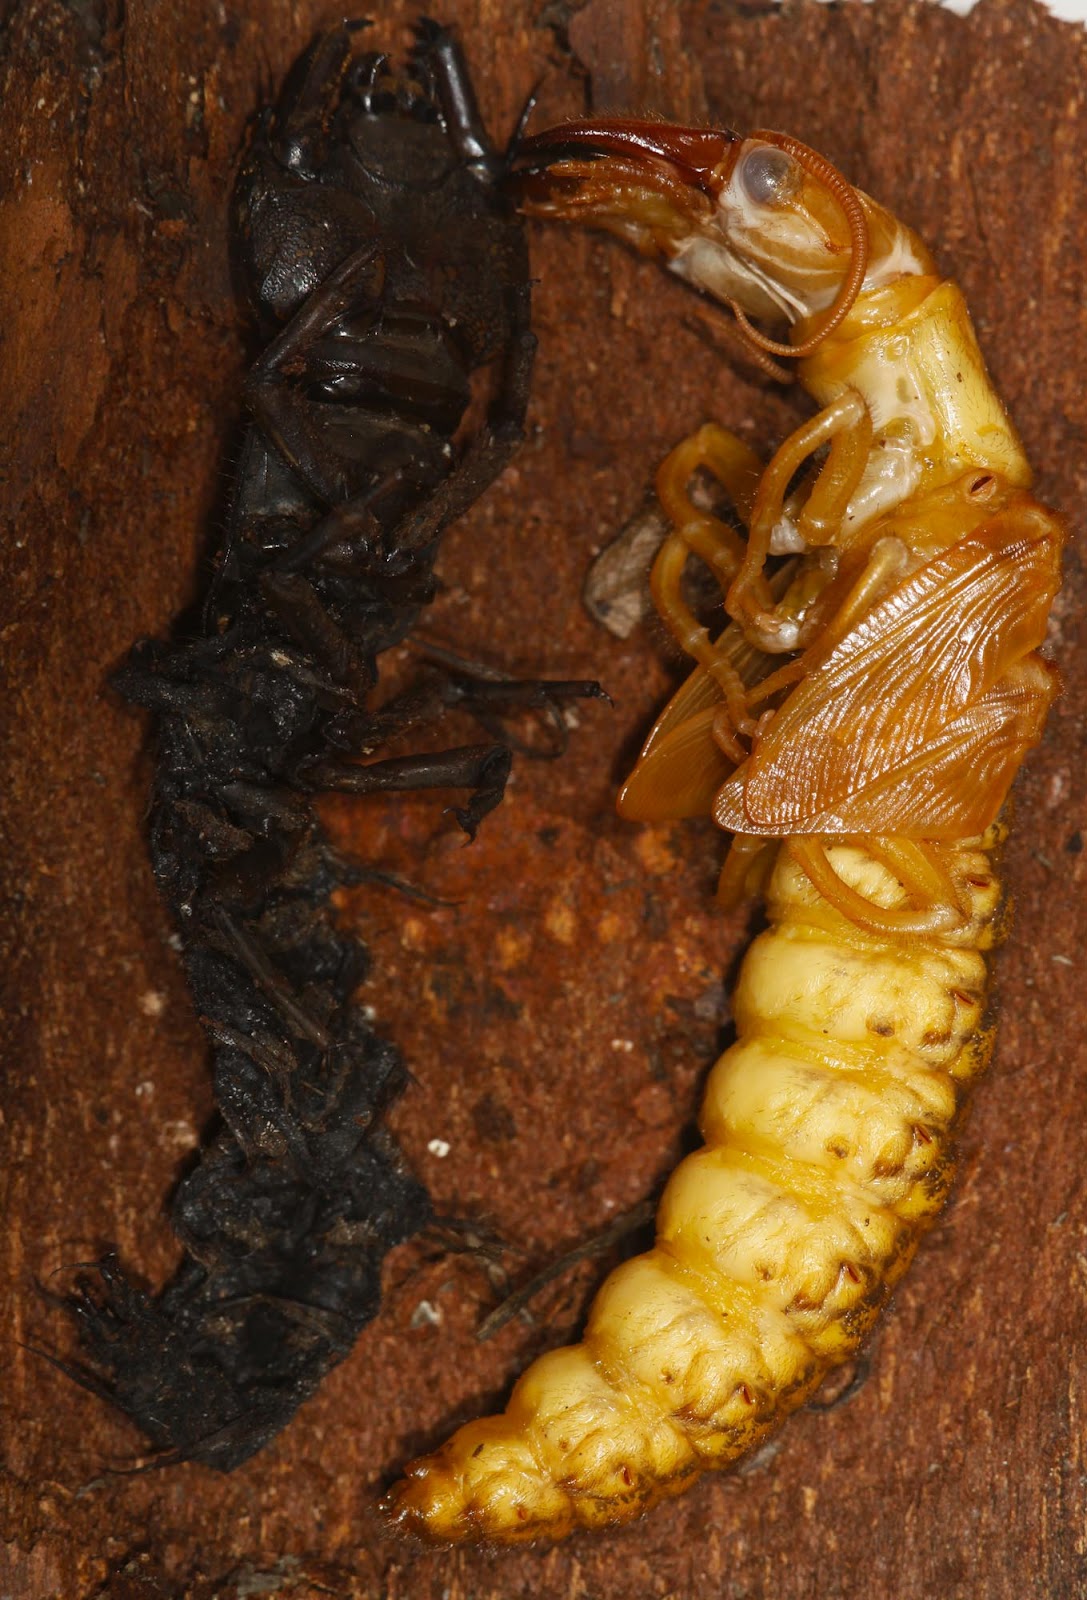 All of Nature: Hellgramite Wandering Equals Dobsonfly Pupae